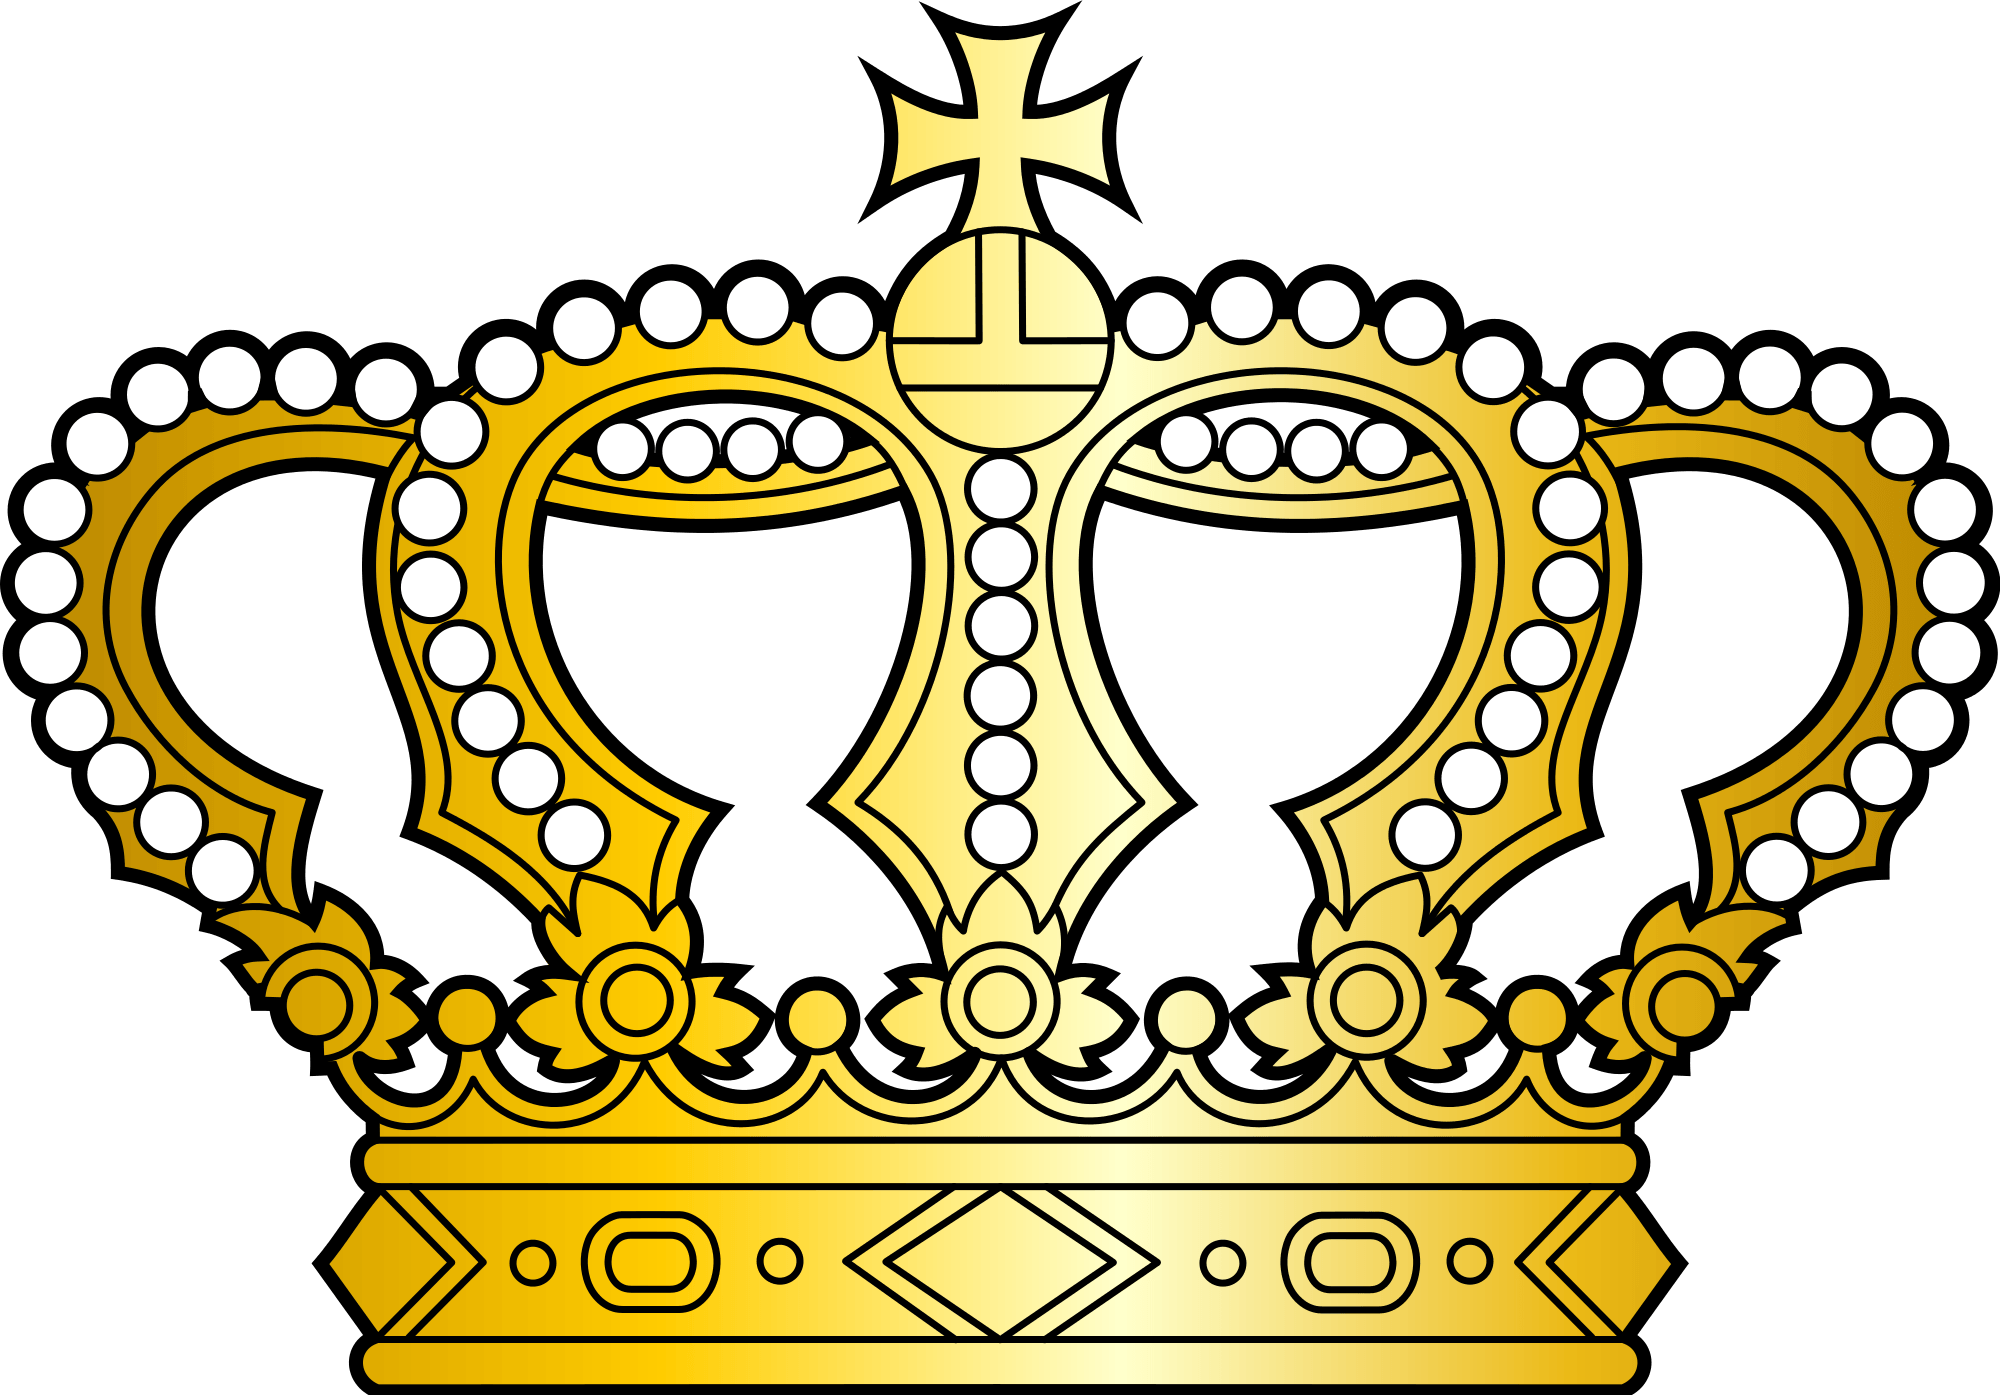 Gold Cross with Crown Logo - Georgian golden crown with pearls and cross.svg